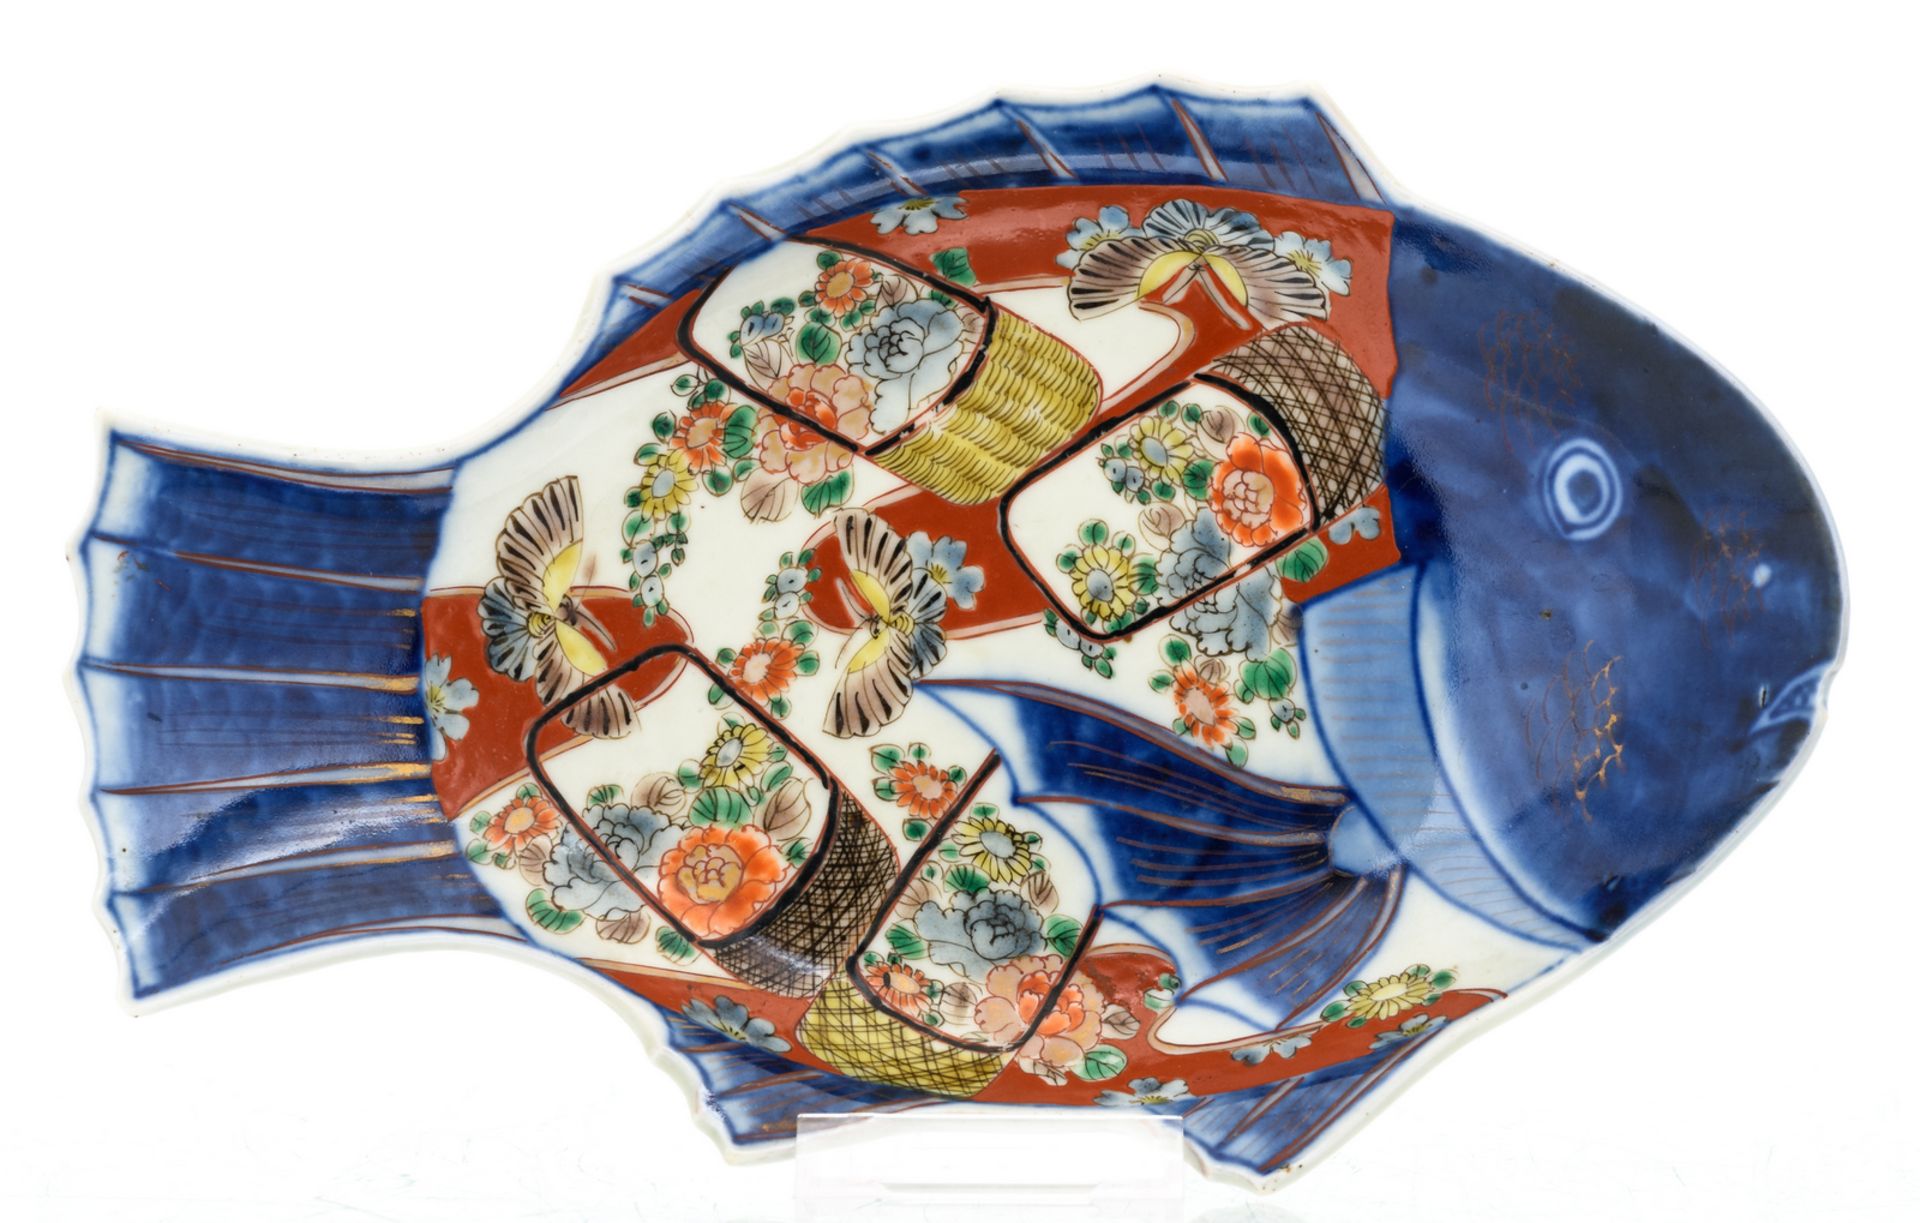 A Japanese plate, a bowl and a fish shaped dish, Imari, Edo and period, H 4,5 - 9,5 - D 25 - 36,5 - Image 4 of 12